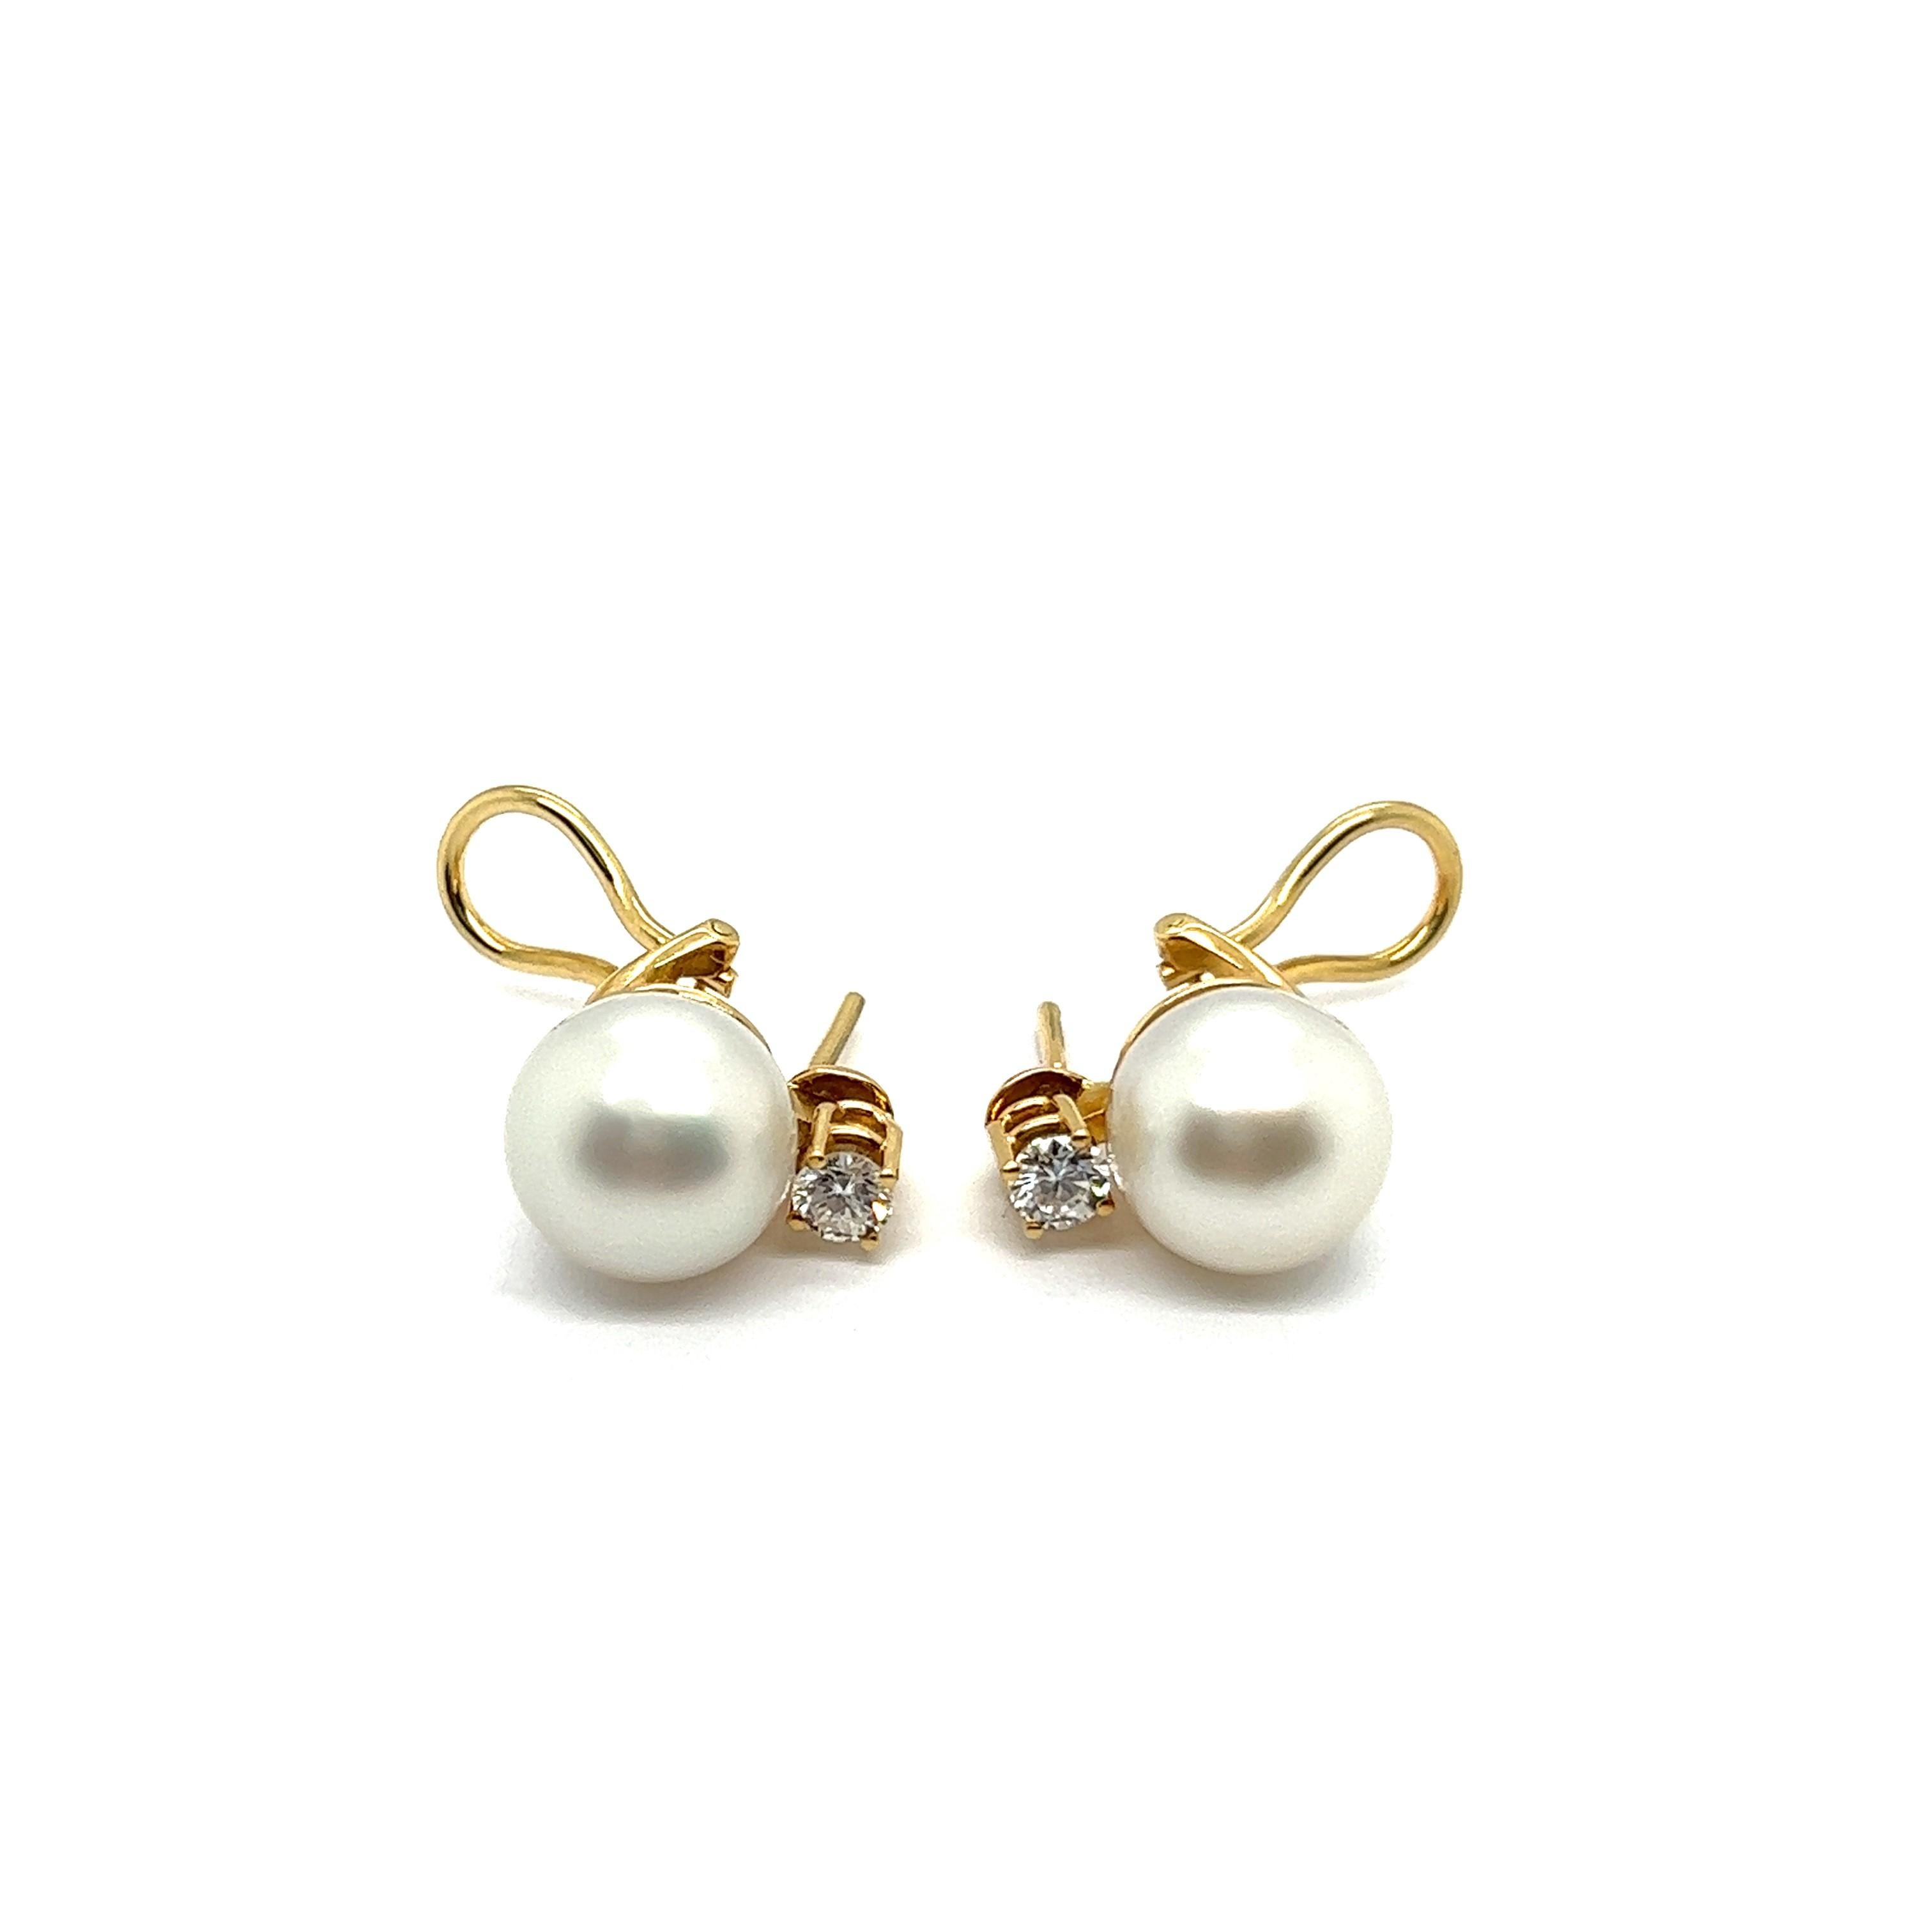 Modern Ear clips with South Sea Pearls & Diamonds in 18 Karat Yellow Gold